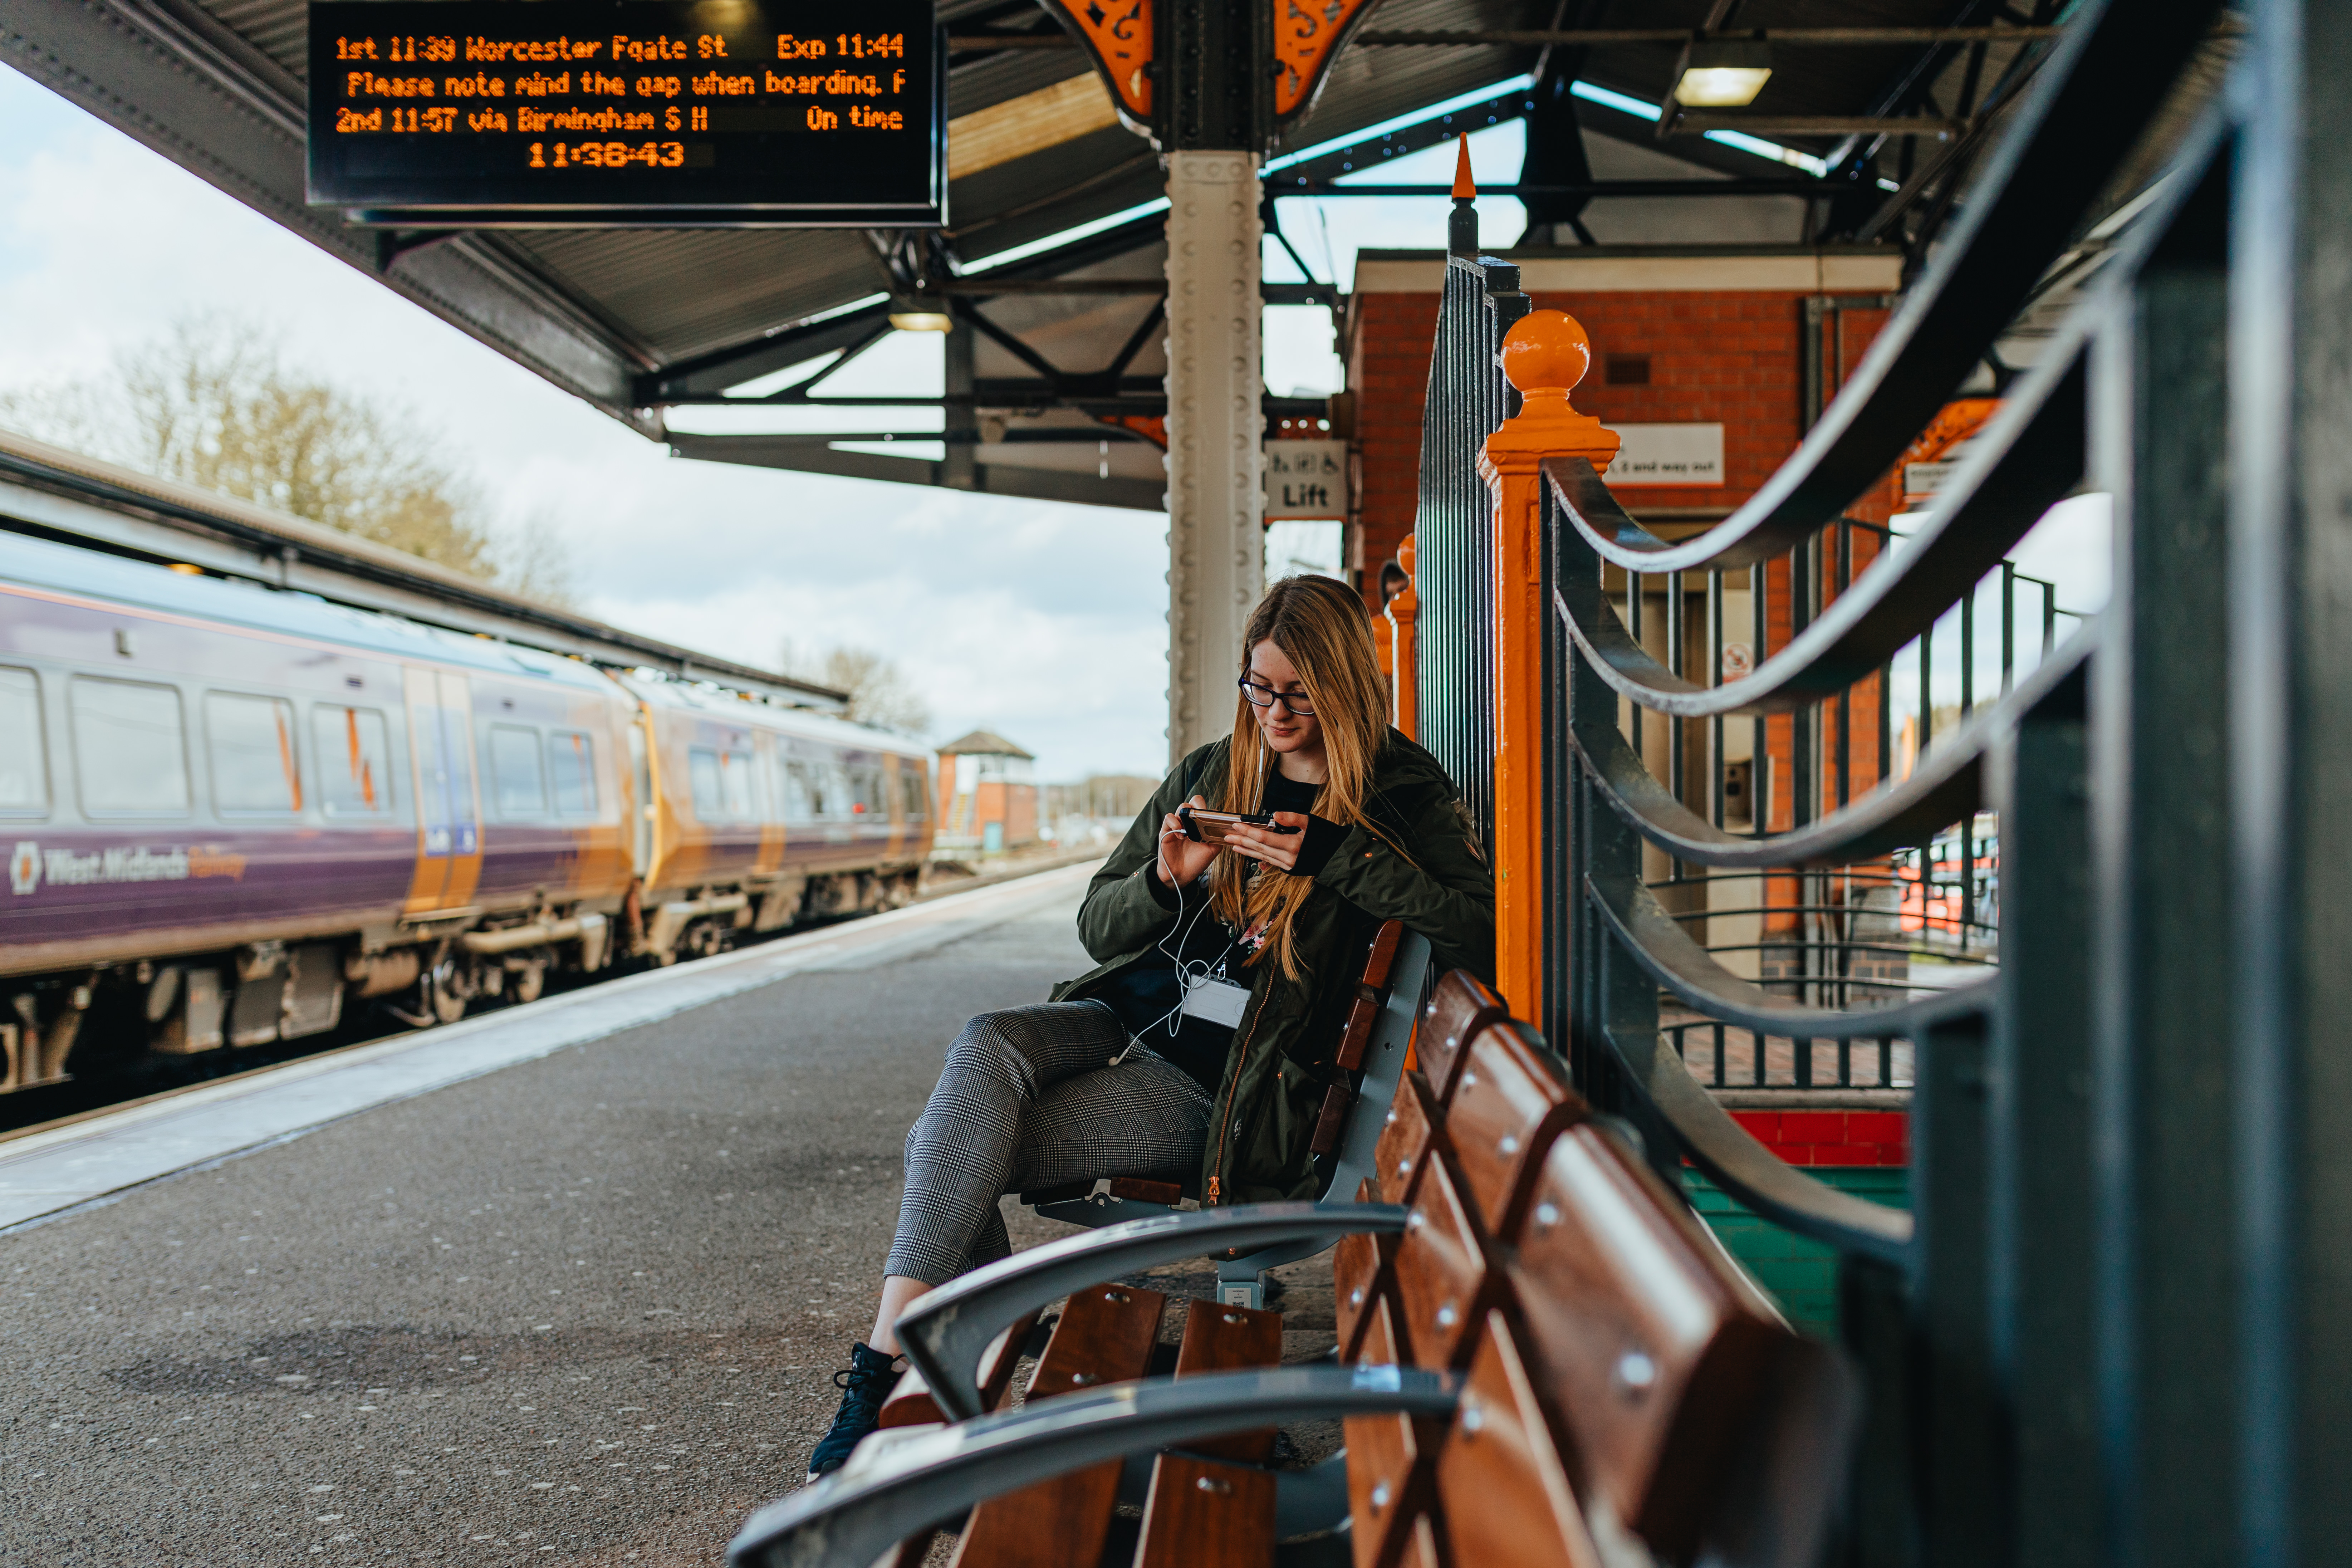 A woman sitting on a bench at a train station